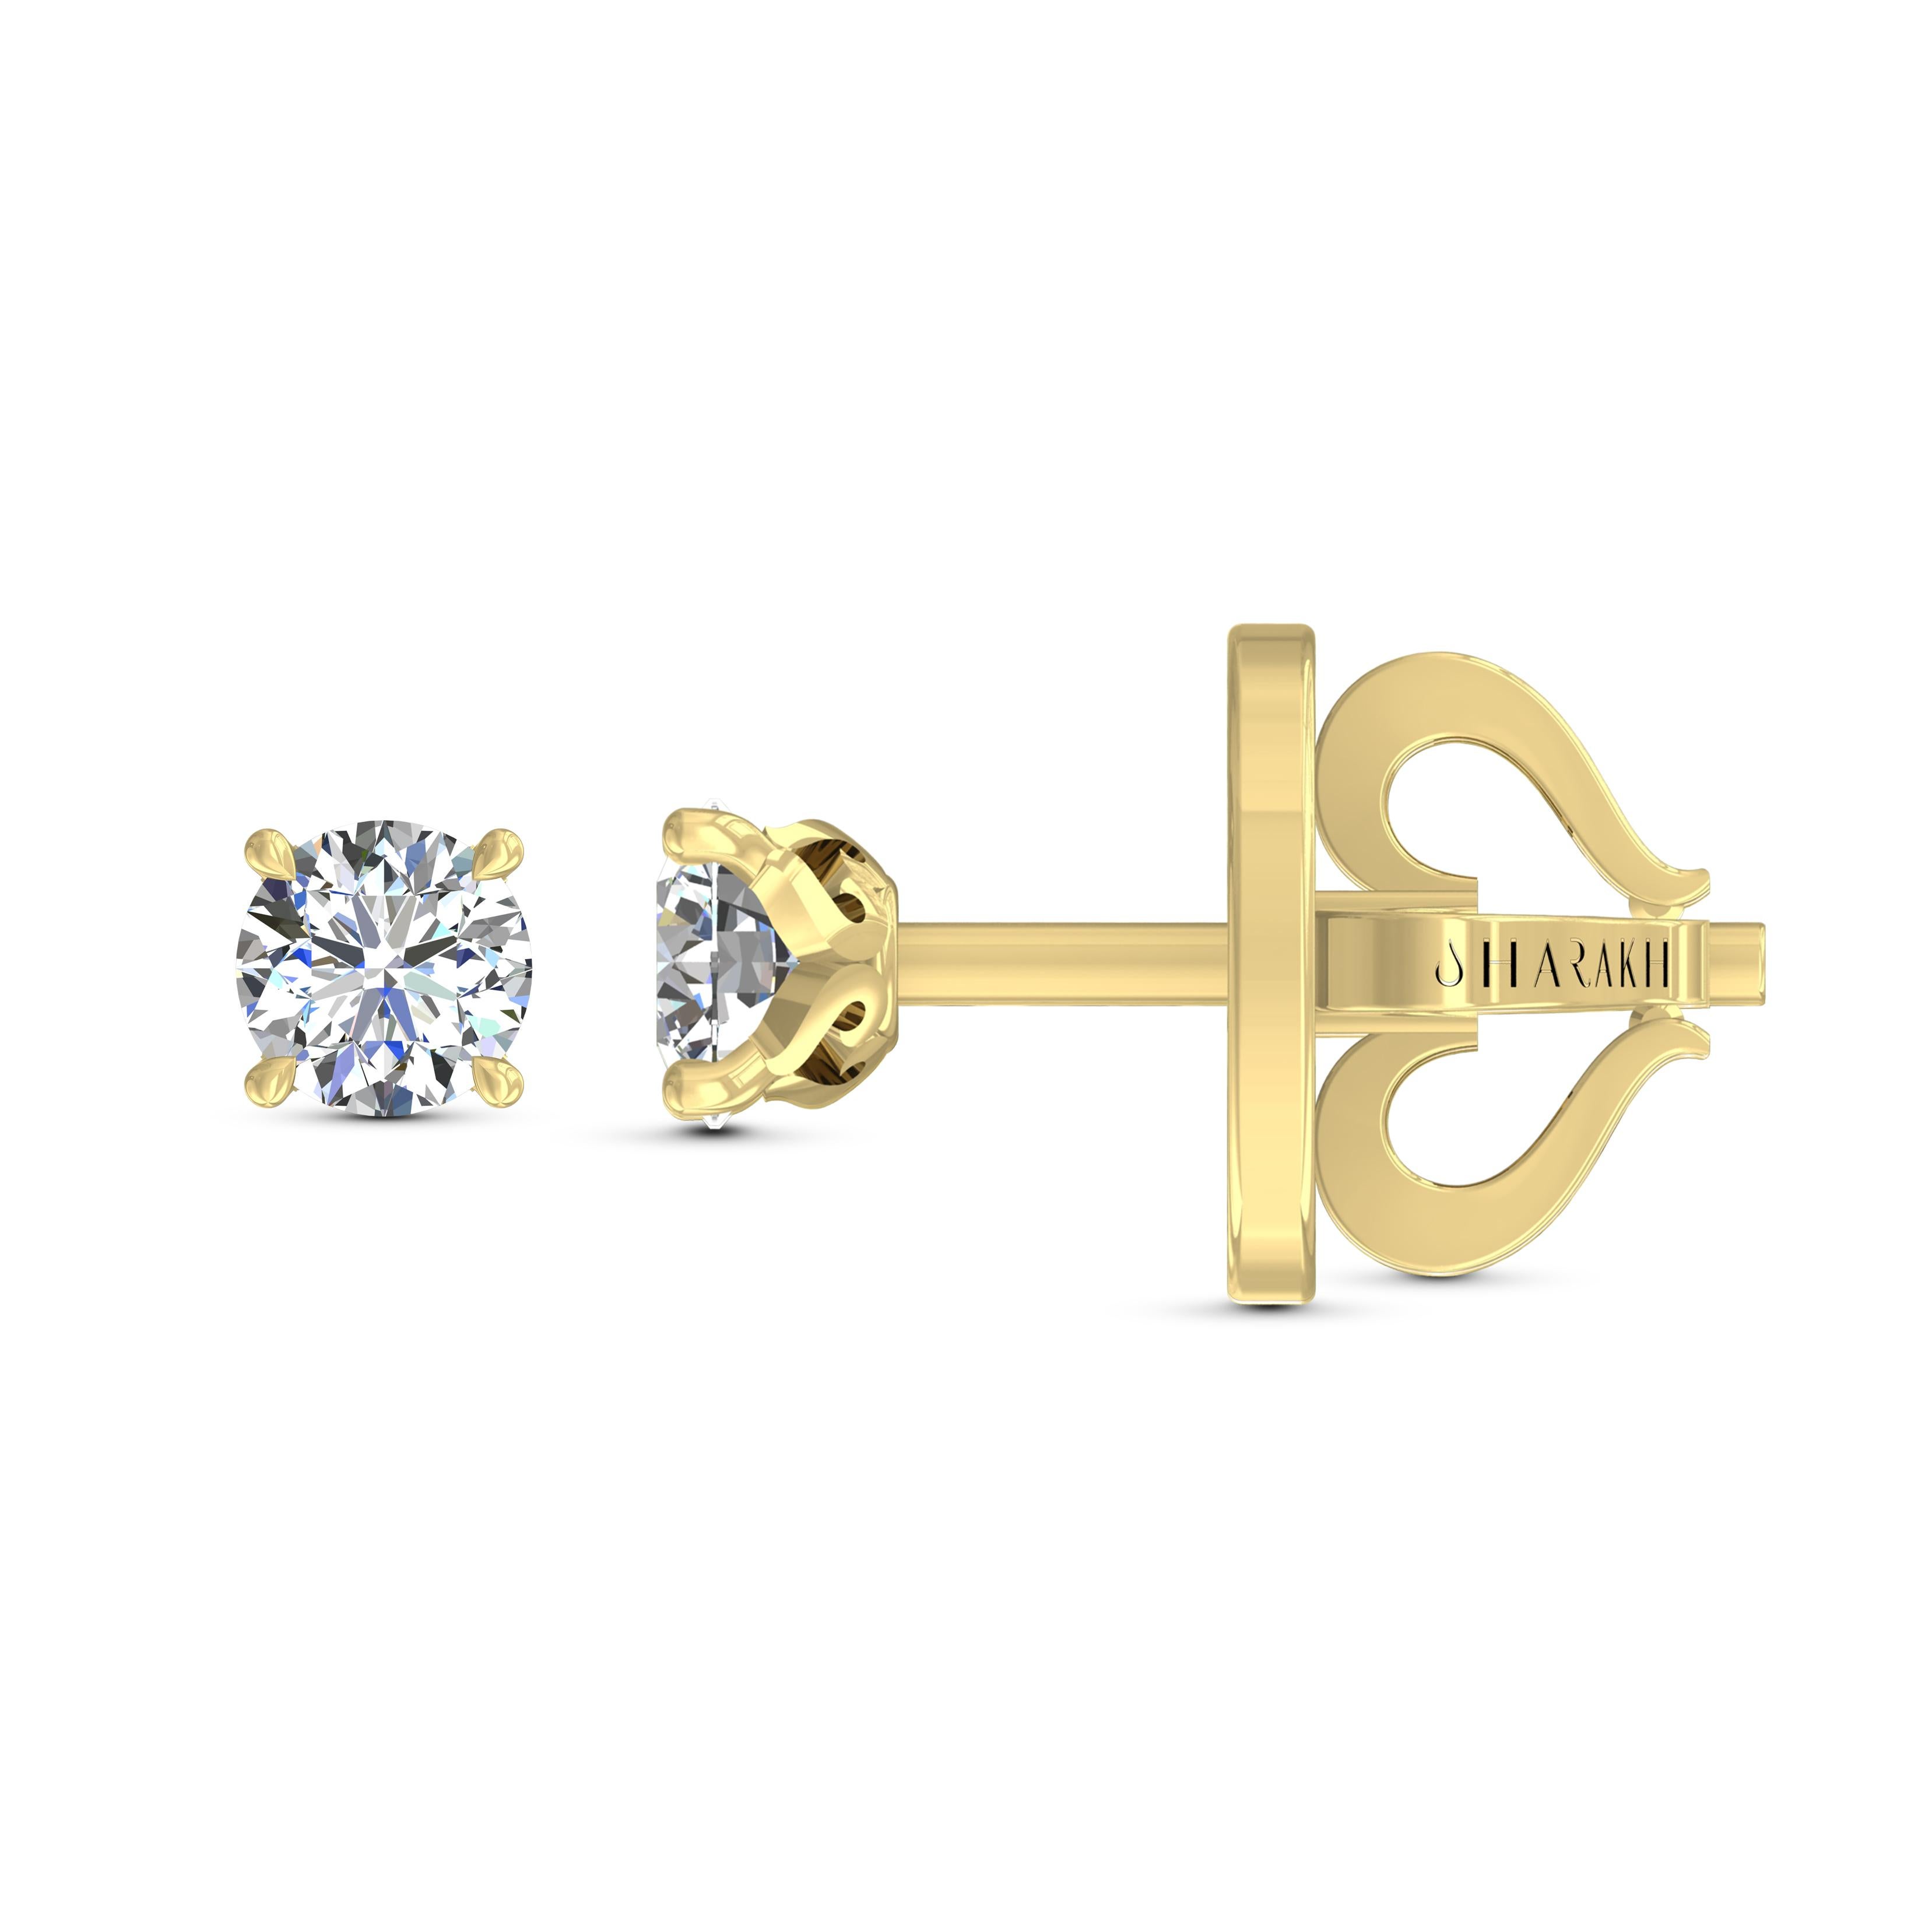 Contemporary Harakh GIA Certified 0.54 Carat D Color VS1 Clarity 18 KT Diamond Stud Earrings